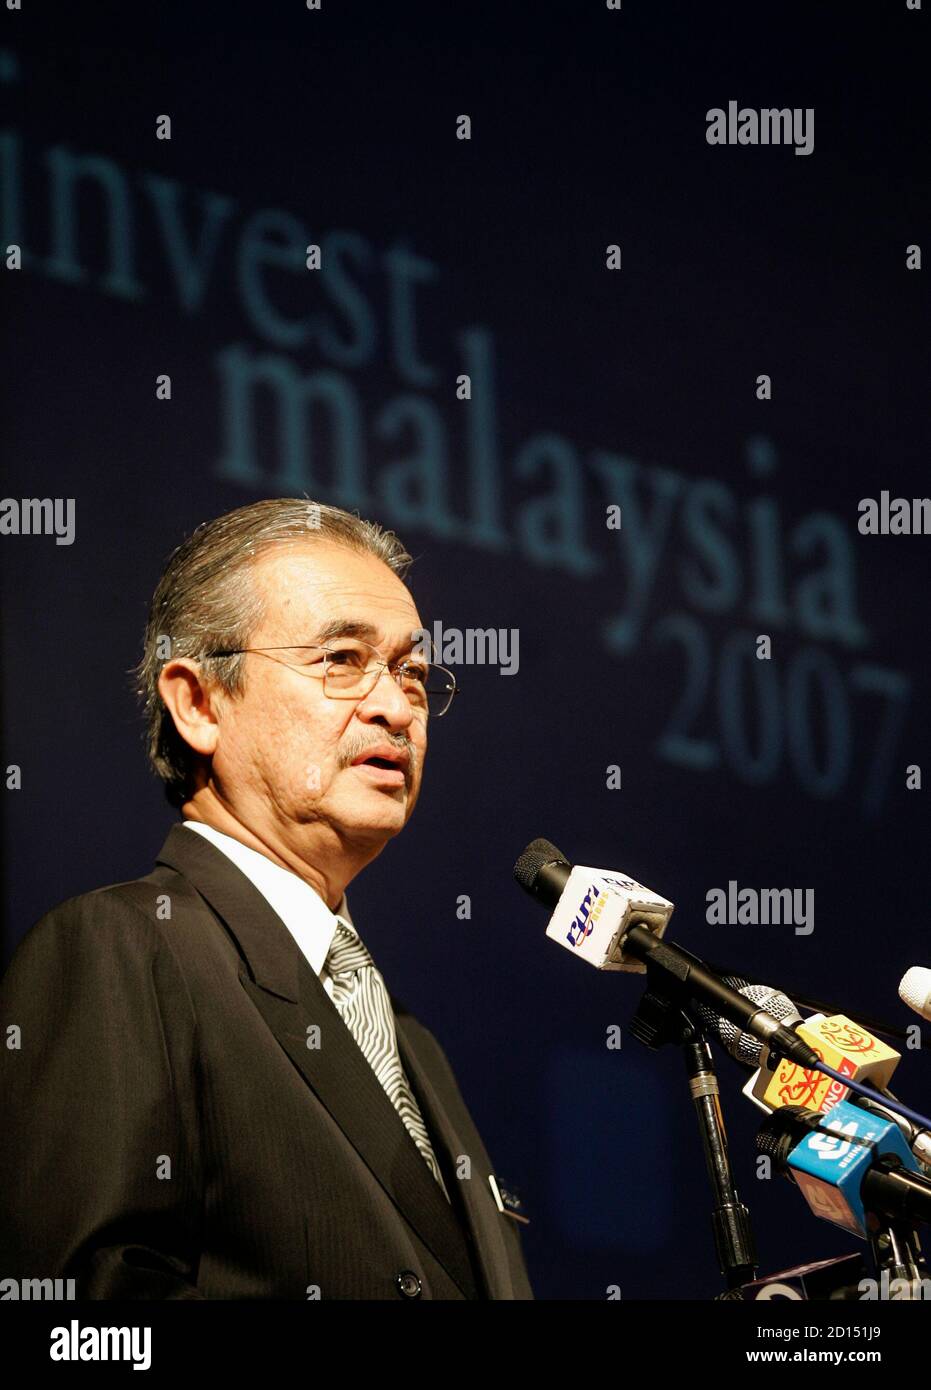 Malaysian Prime Minister Abdullah Ahmad Badawi delivers his keynote address during Invest Malaysia 2007 in Kuala Lumpur March 22, 2007. Malaysia will abolish capital gains tax on property next month, Abdullah said on Thursday, as part of a package to drum up foreign investments.    REUTERS/Zainal Abd Halim (MALAYSIA) Stock Photo